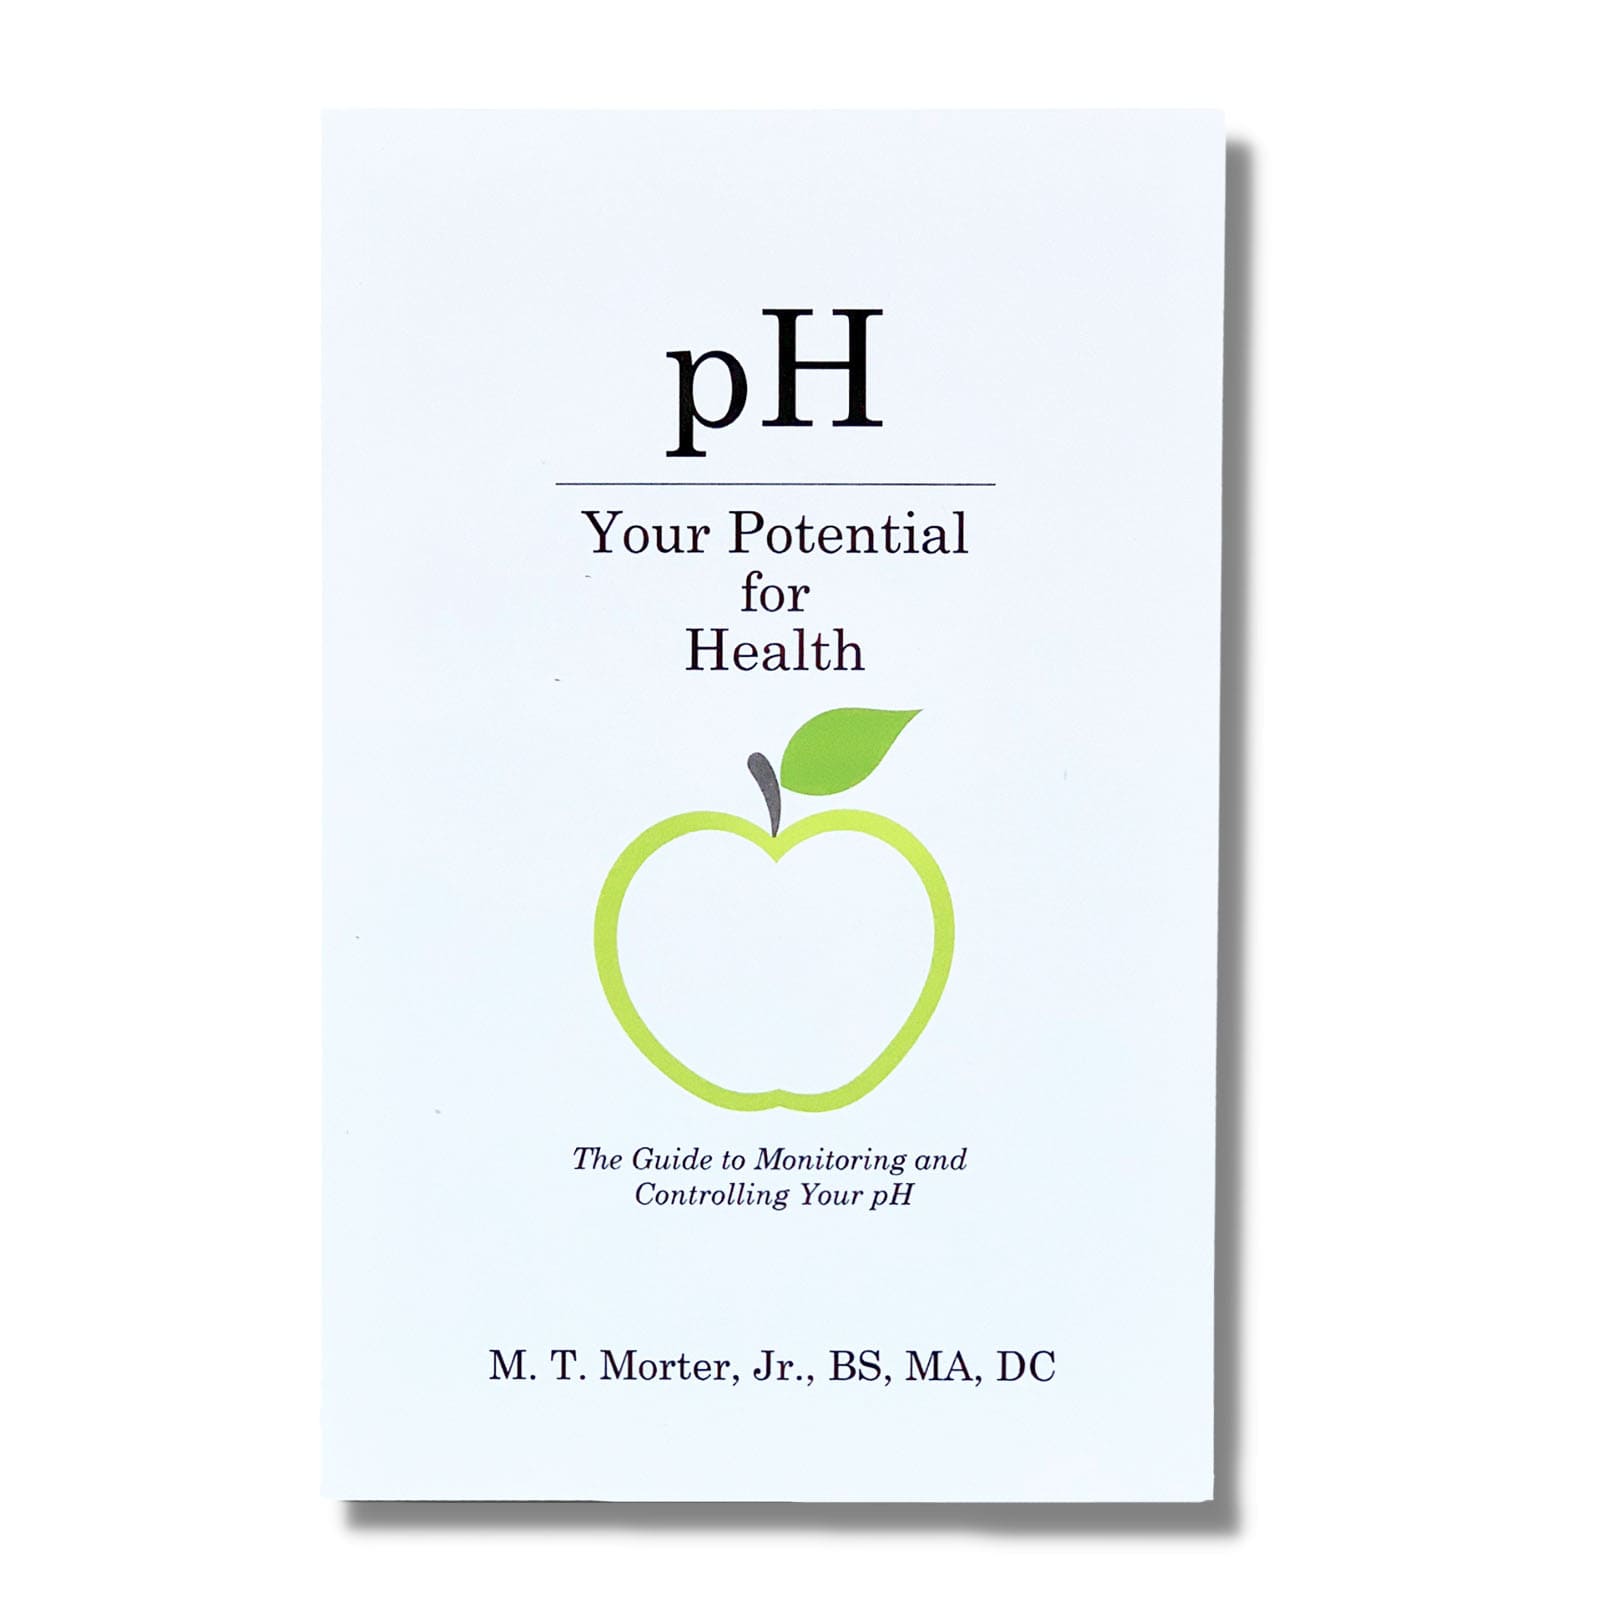 pH Your Potential for Health